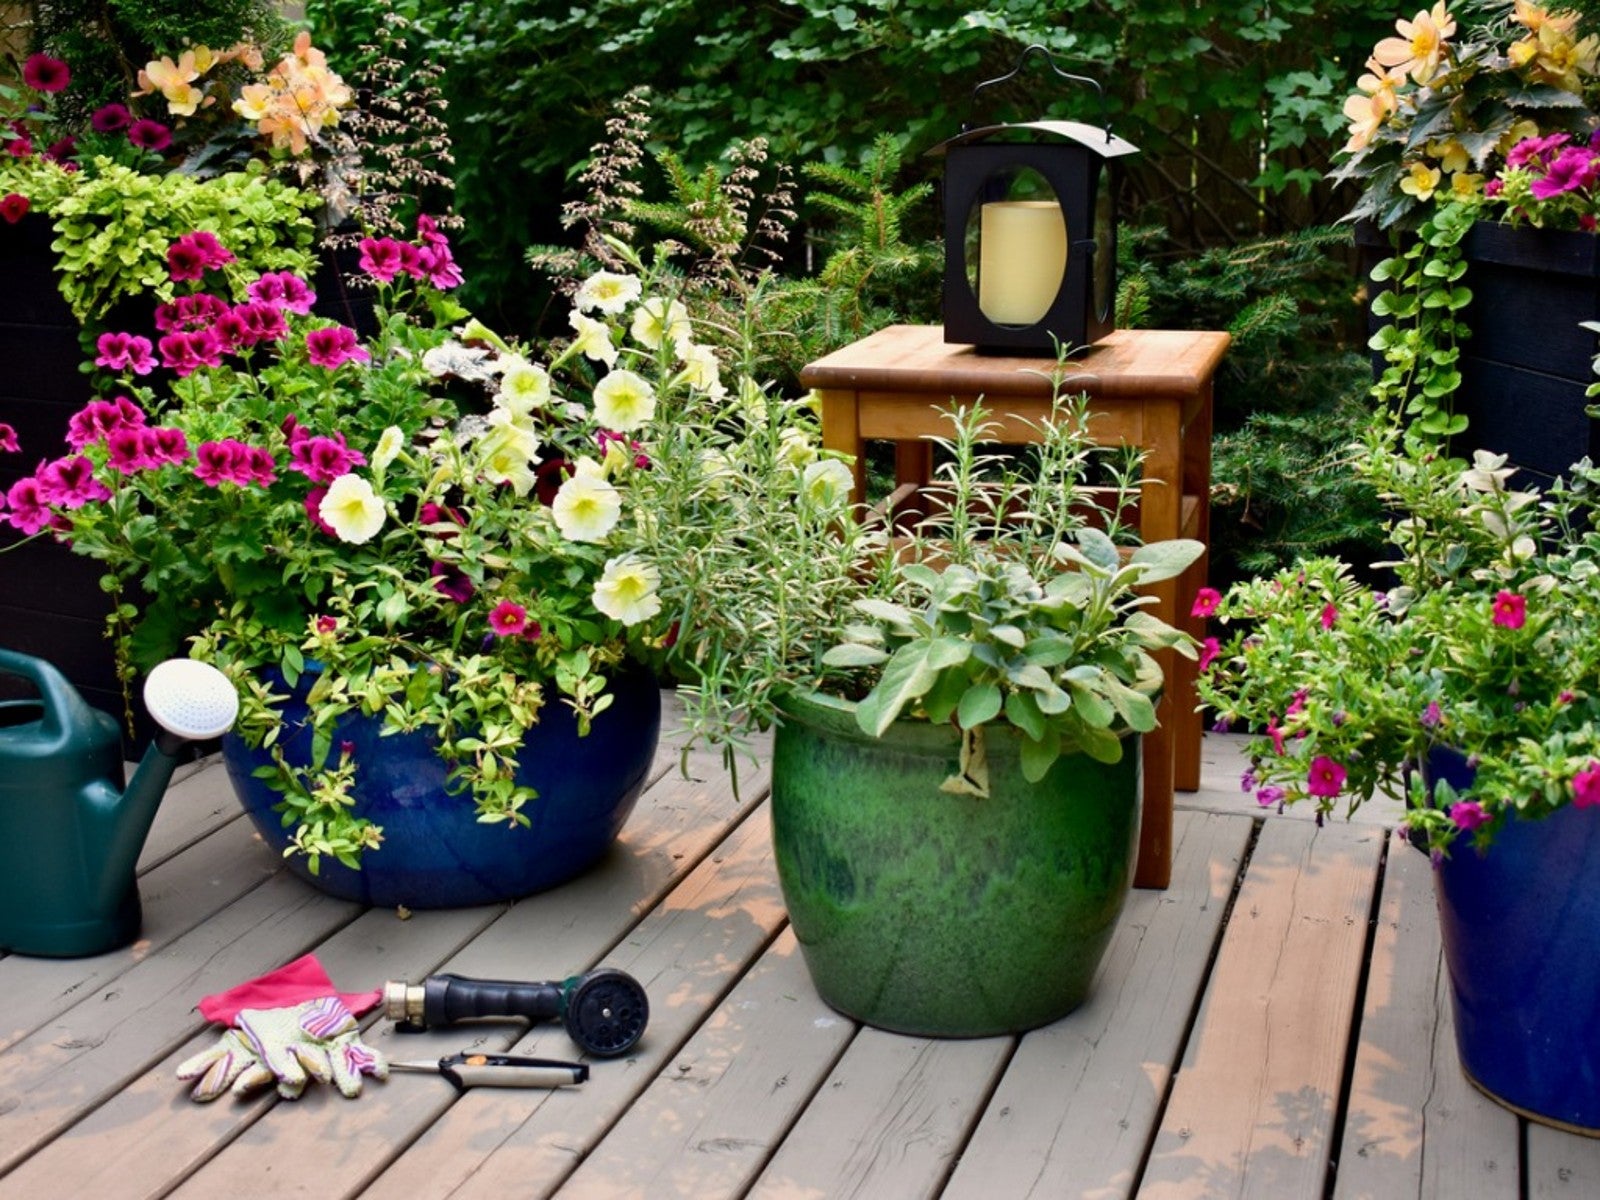 115 Of Our Best Container Gardening Ideas